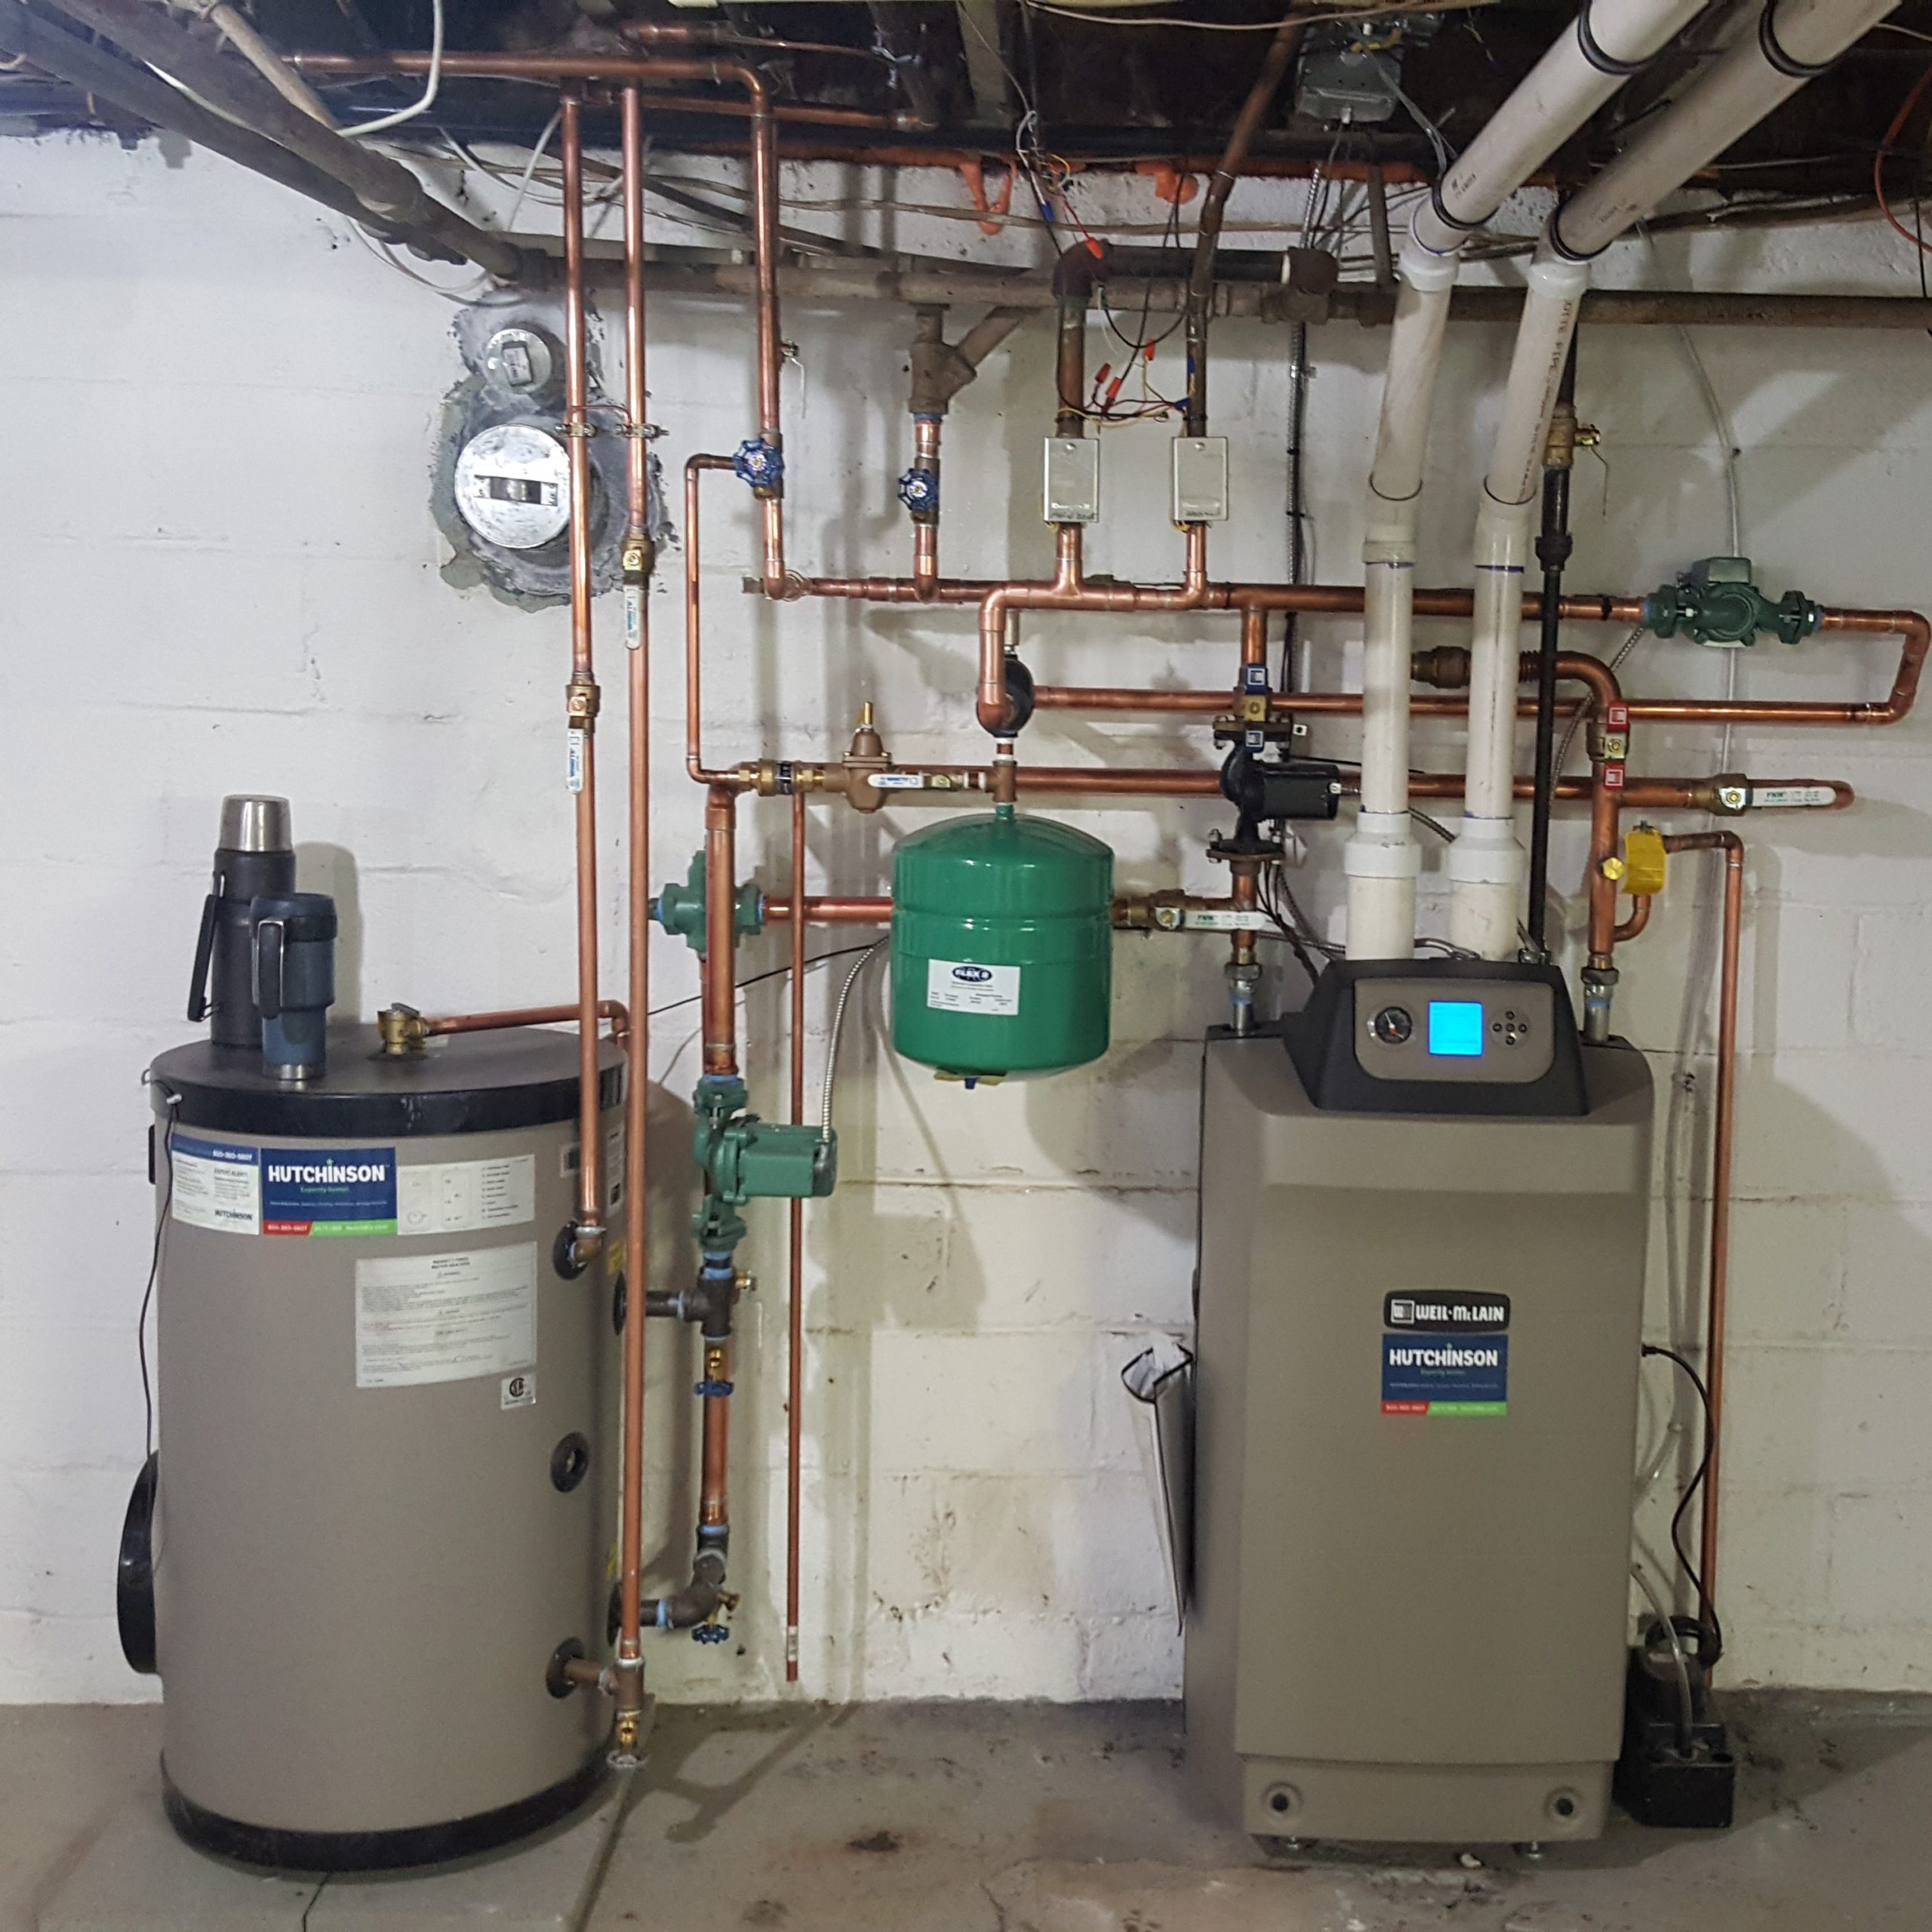 Plumbing, Heating and Air Conditioning Services in Barrington, NJ